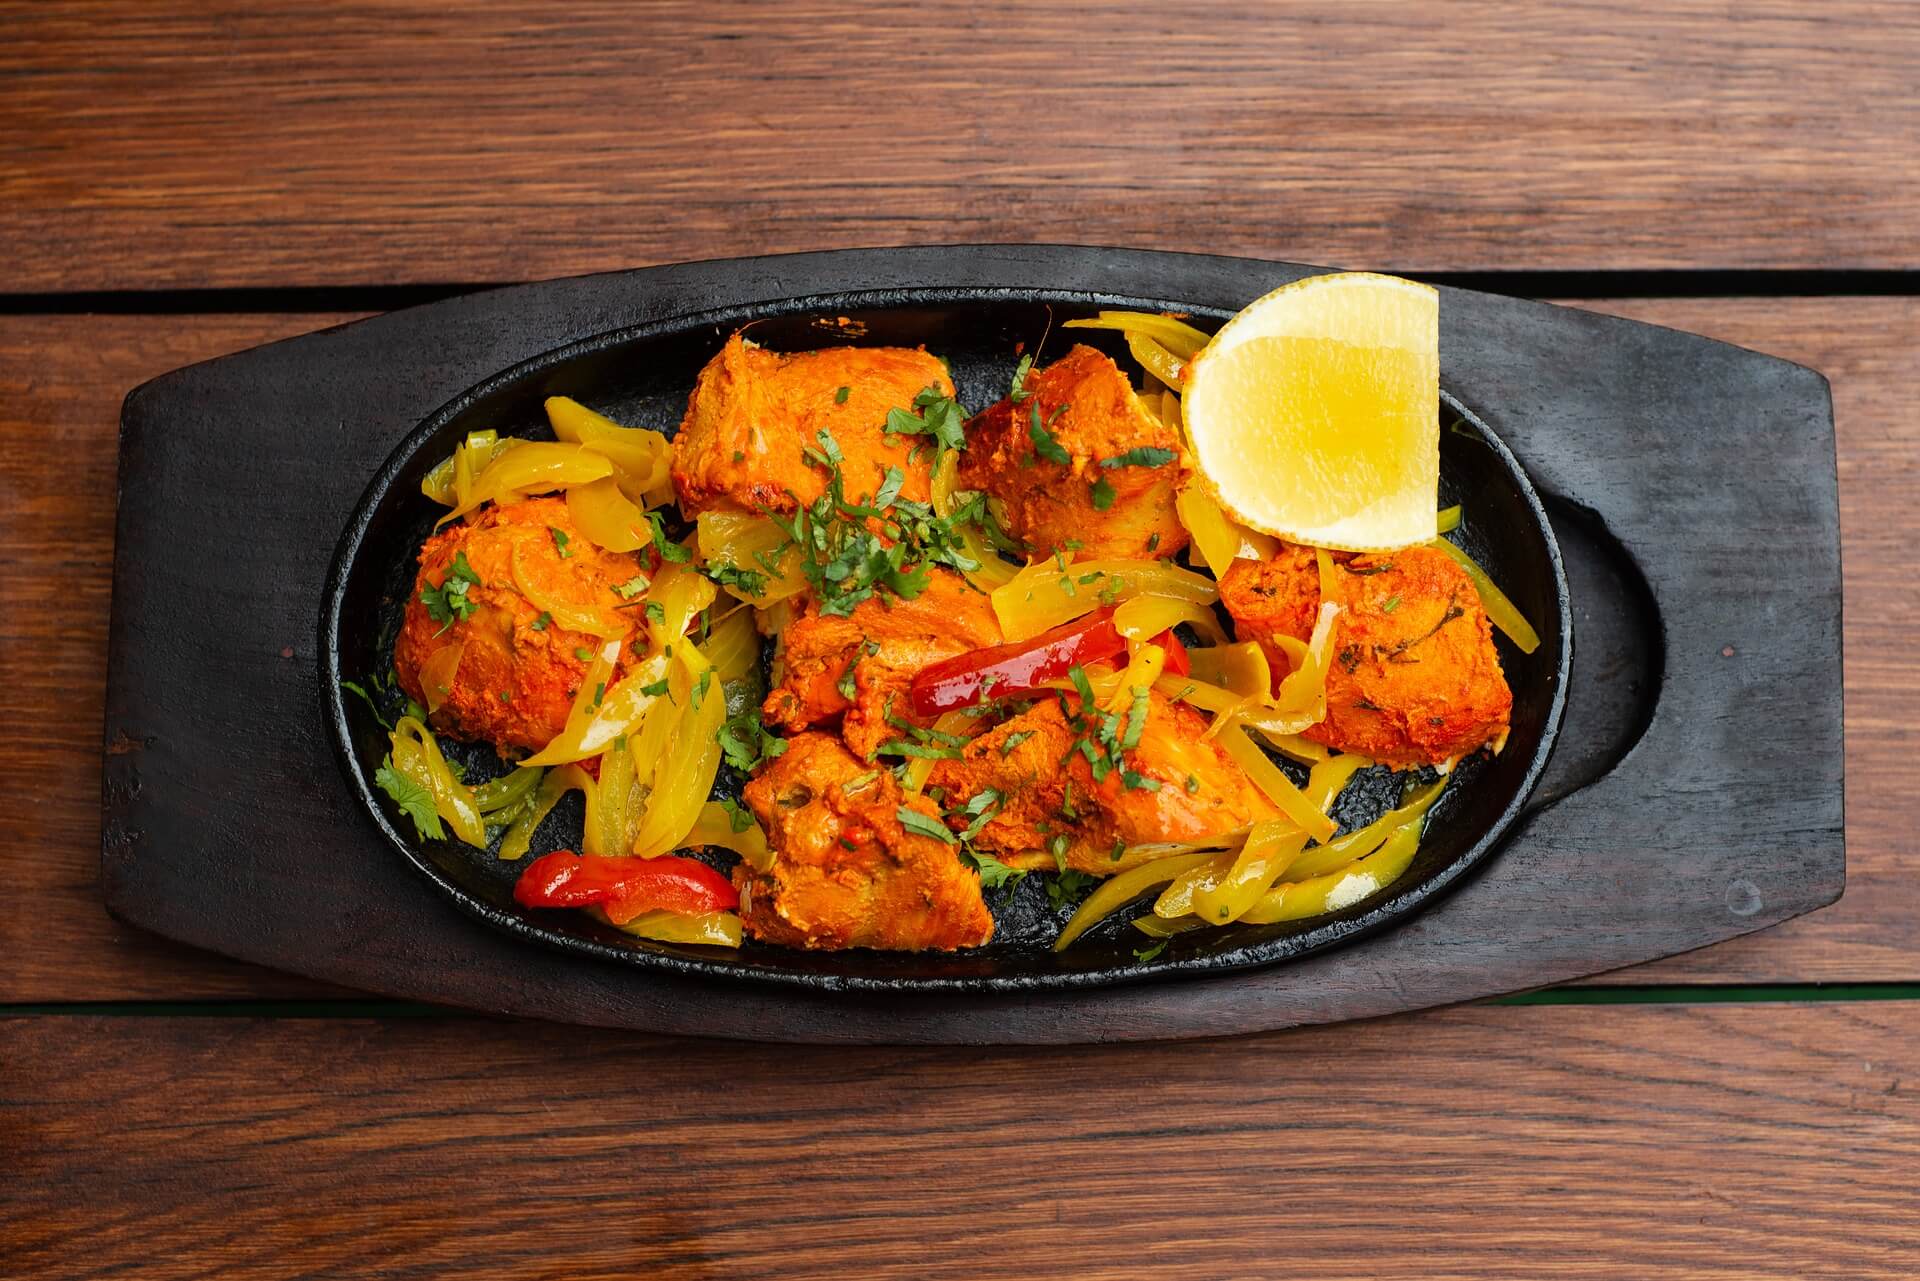 How to Find an Authentic Indian Restaurant in Kilkenny How to Find an Authentic Indian Restaurant in Kilkenny